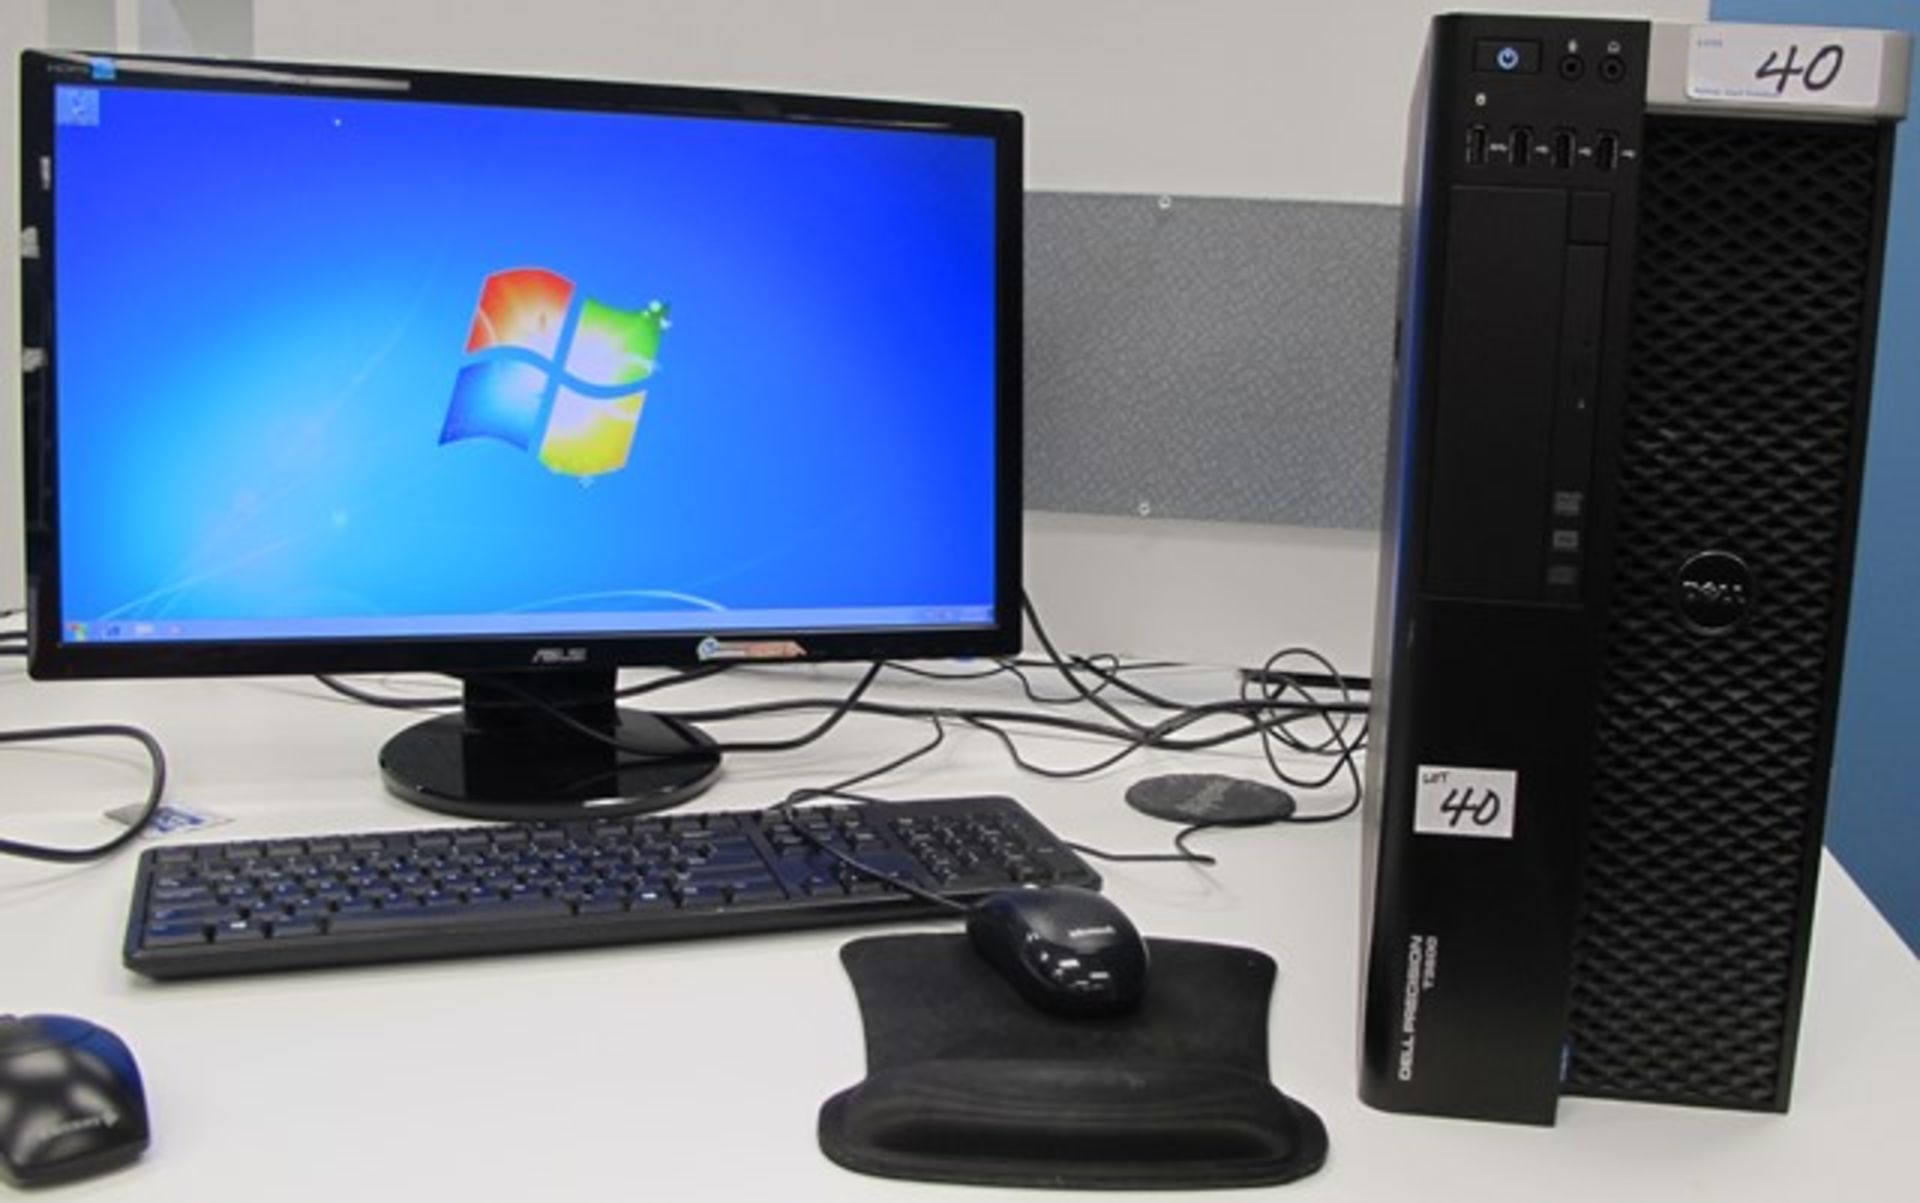 DELL PRECISION T3600 TOWER COMPUTER W/DELL MONITOR, KEYBOARD, MOUSE (WINDOWS 7)